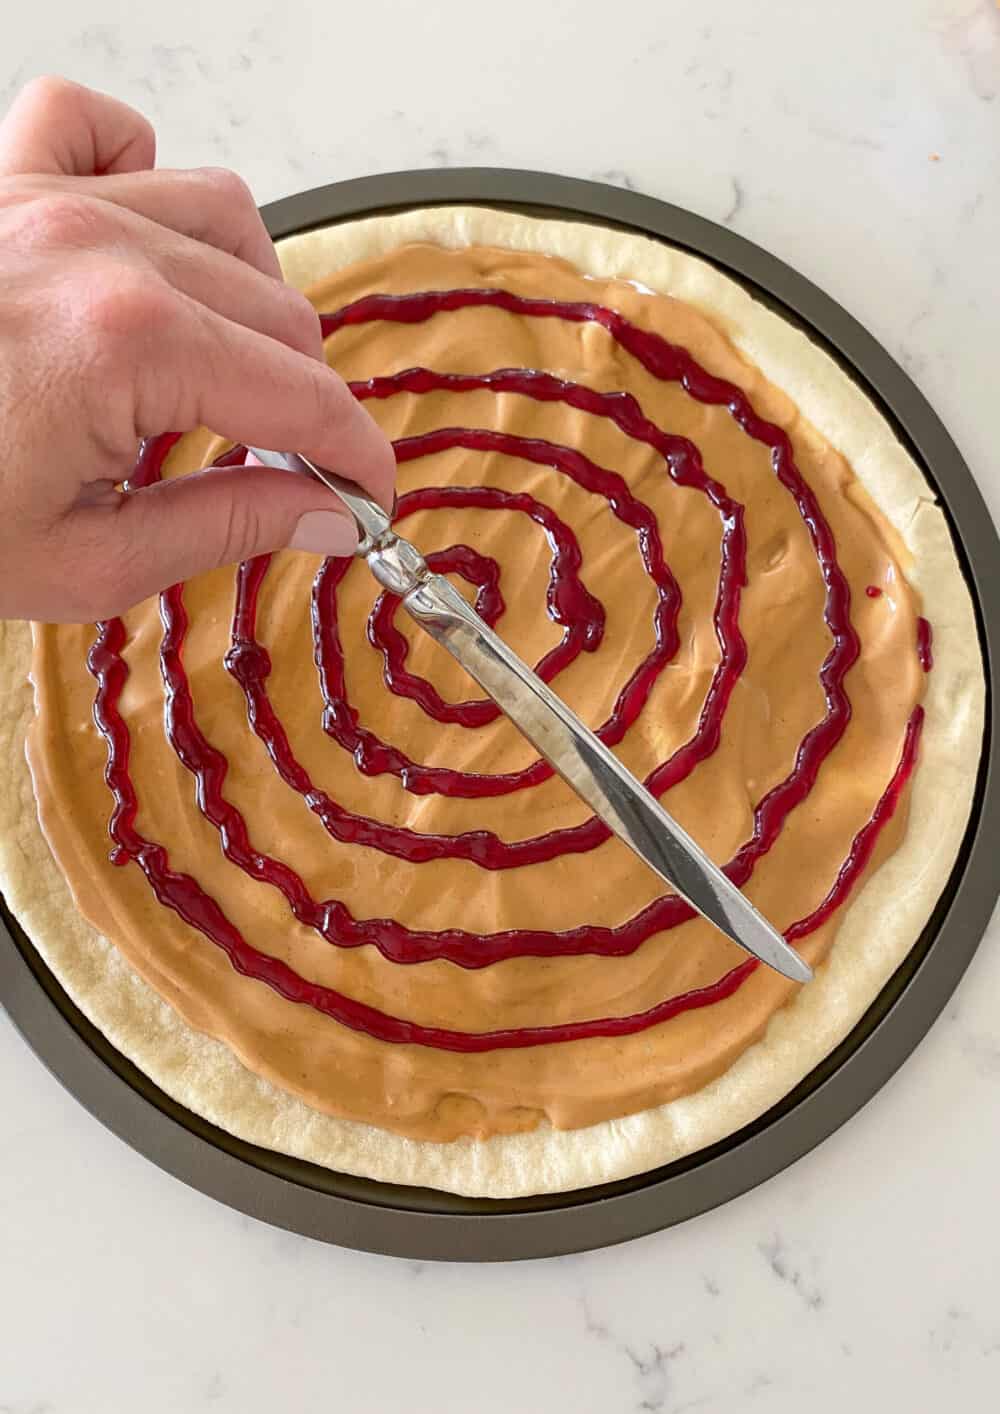 swirling jelly into peanut butter